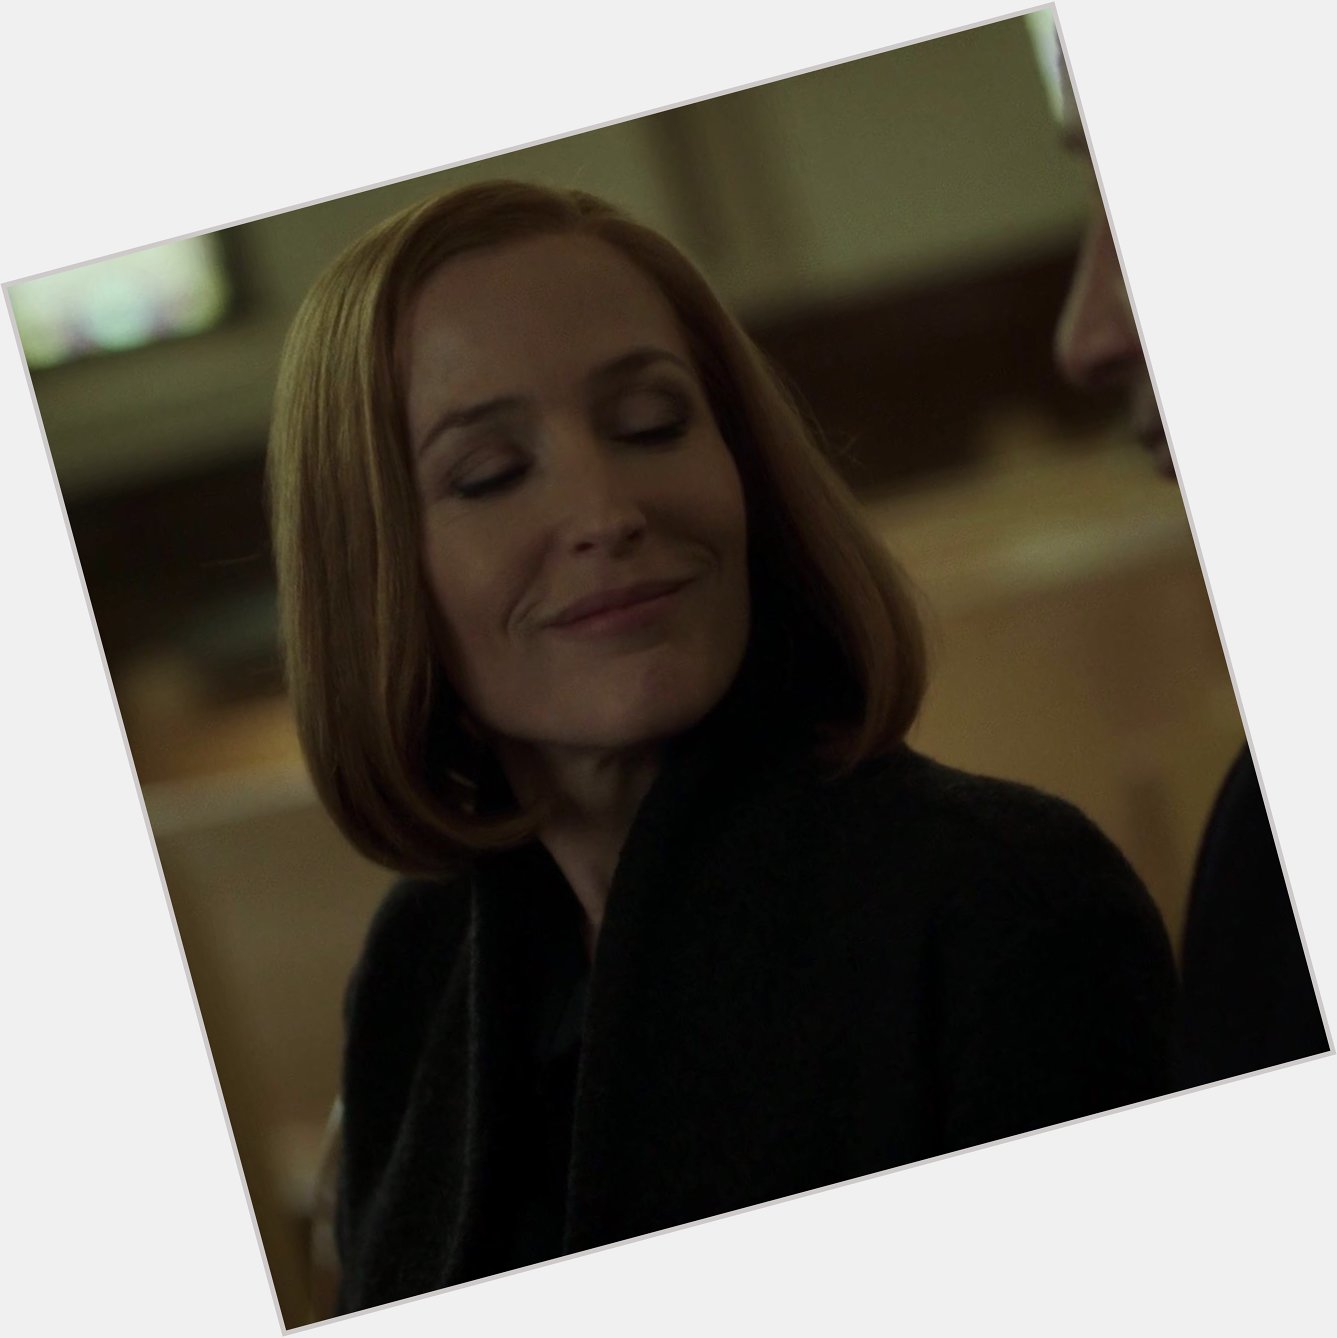 Happy birthday dana scully, i love you and miss you immensely 